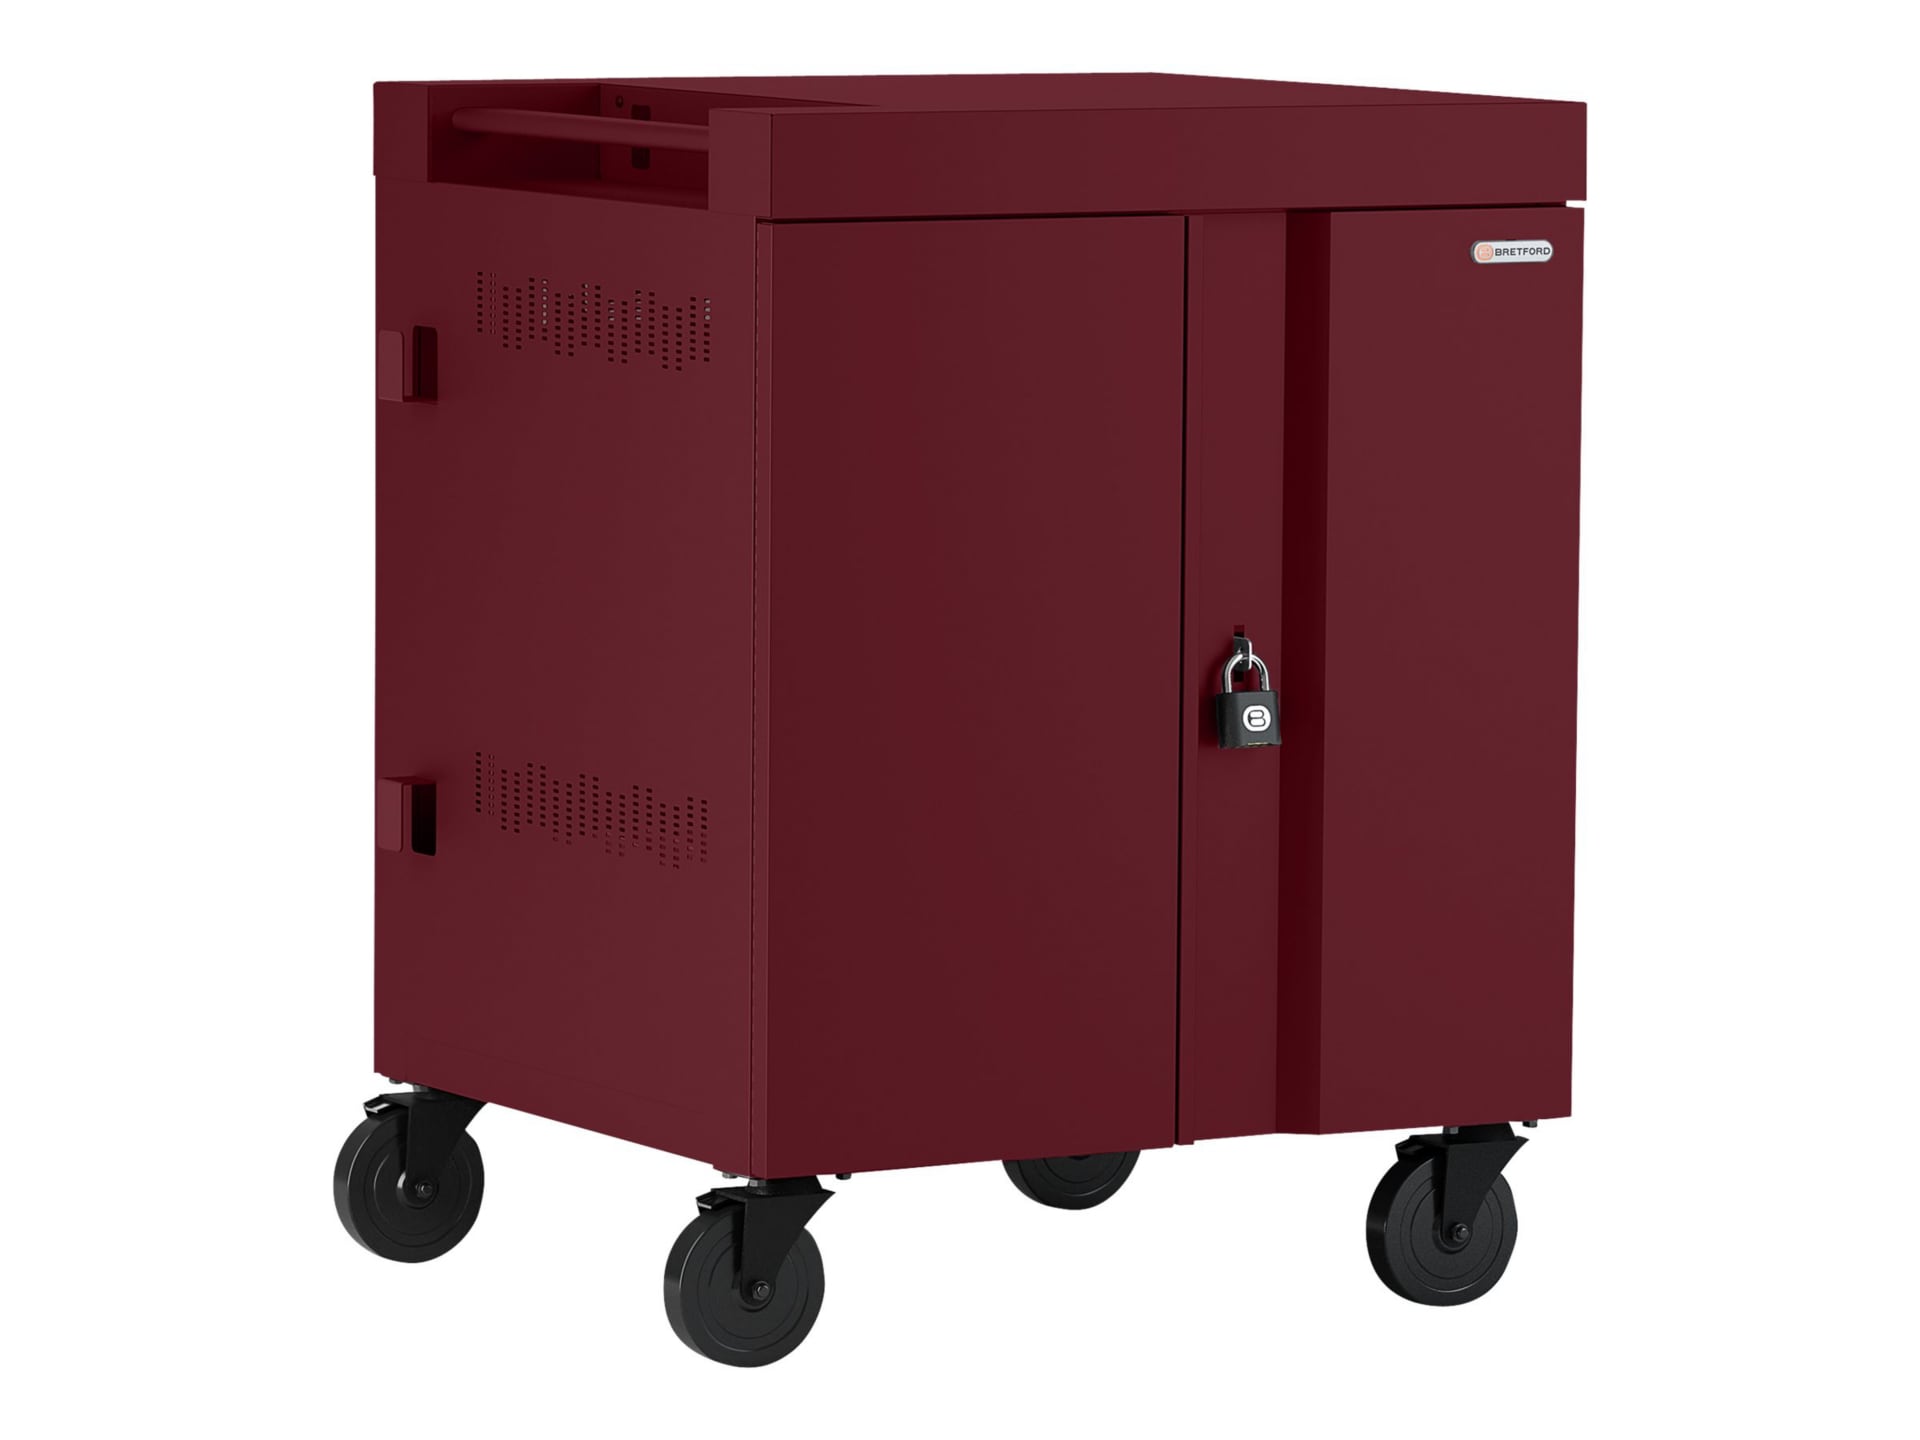 Bretford Cube TVC16PAC - cart - for 16 netbooks/tablets - maroon